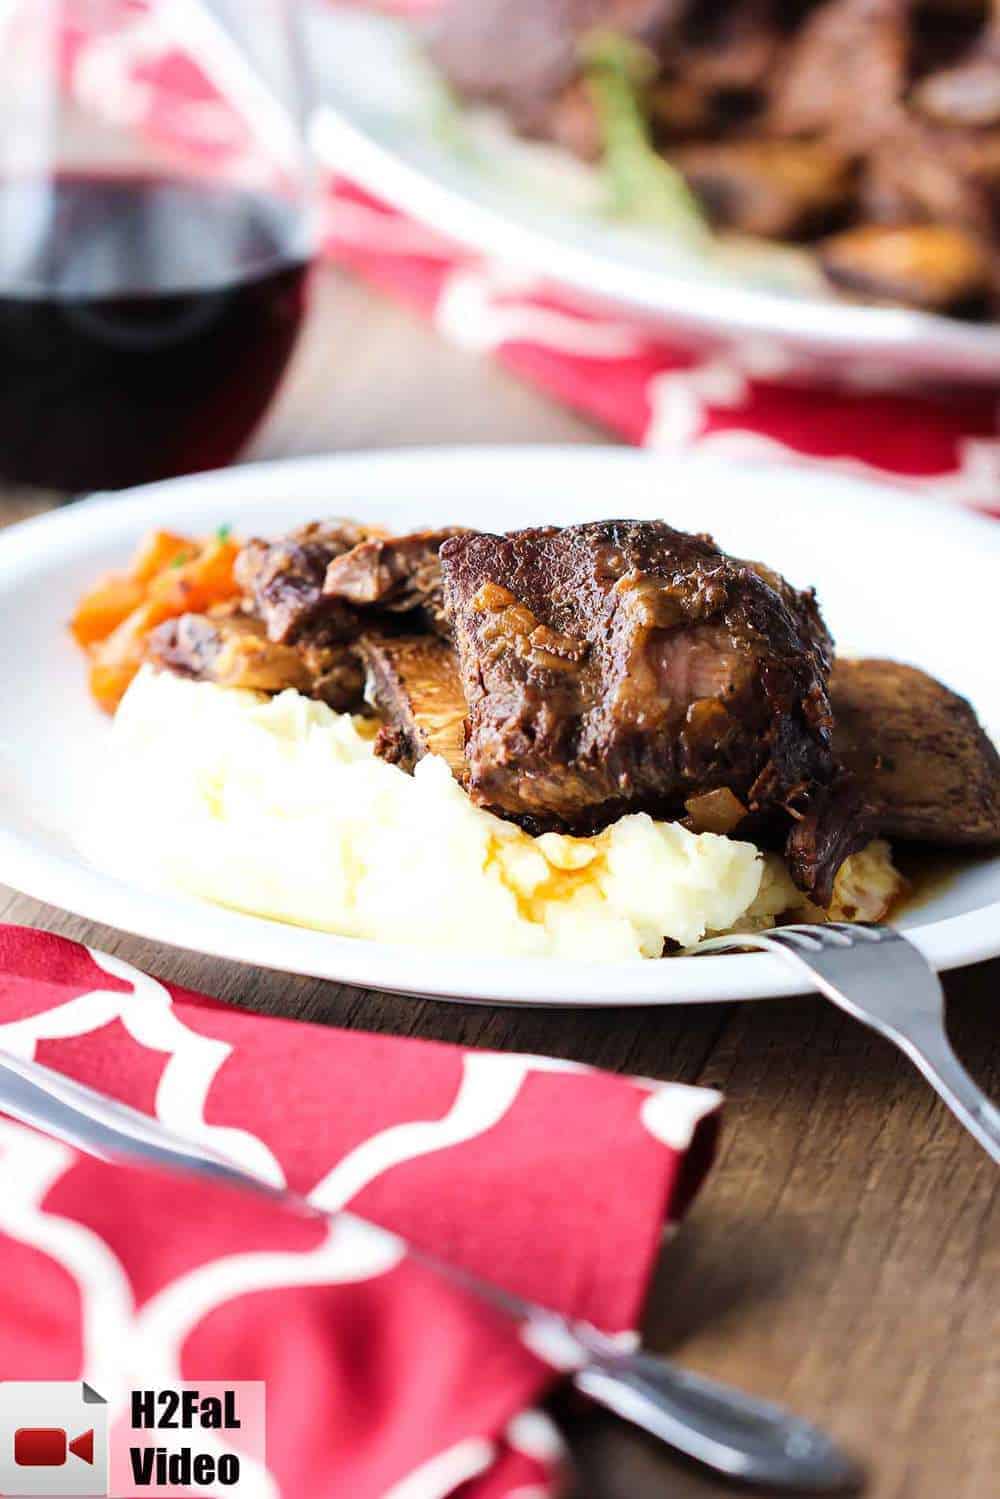 Place the Instant Pot Beef Short Ribs on a serving plate with mashed potatoes.